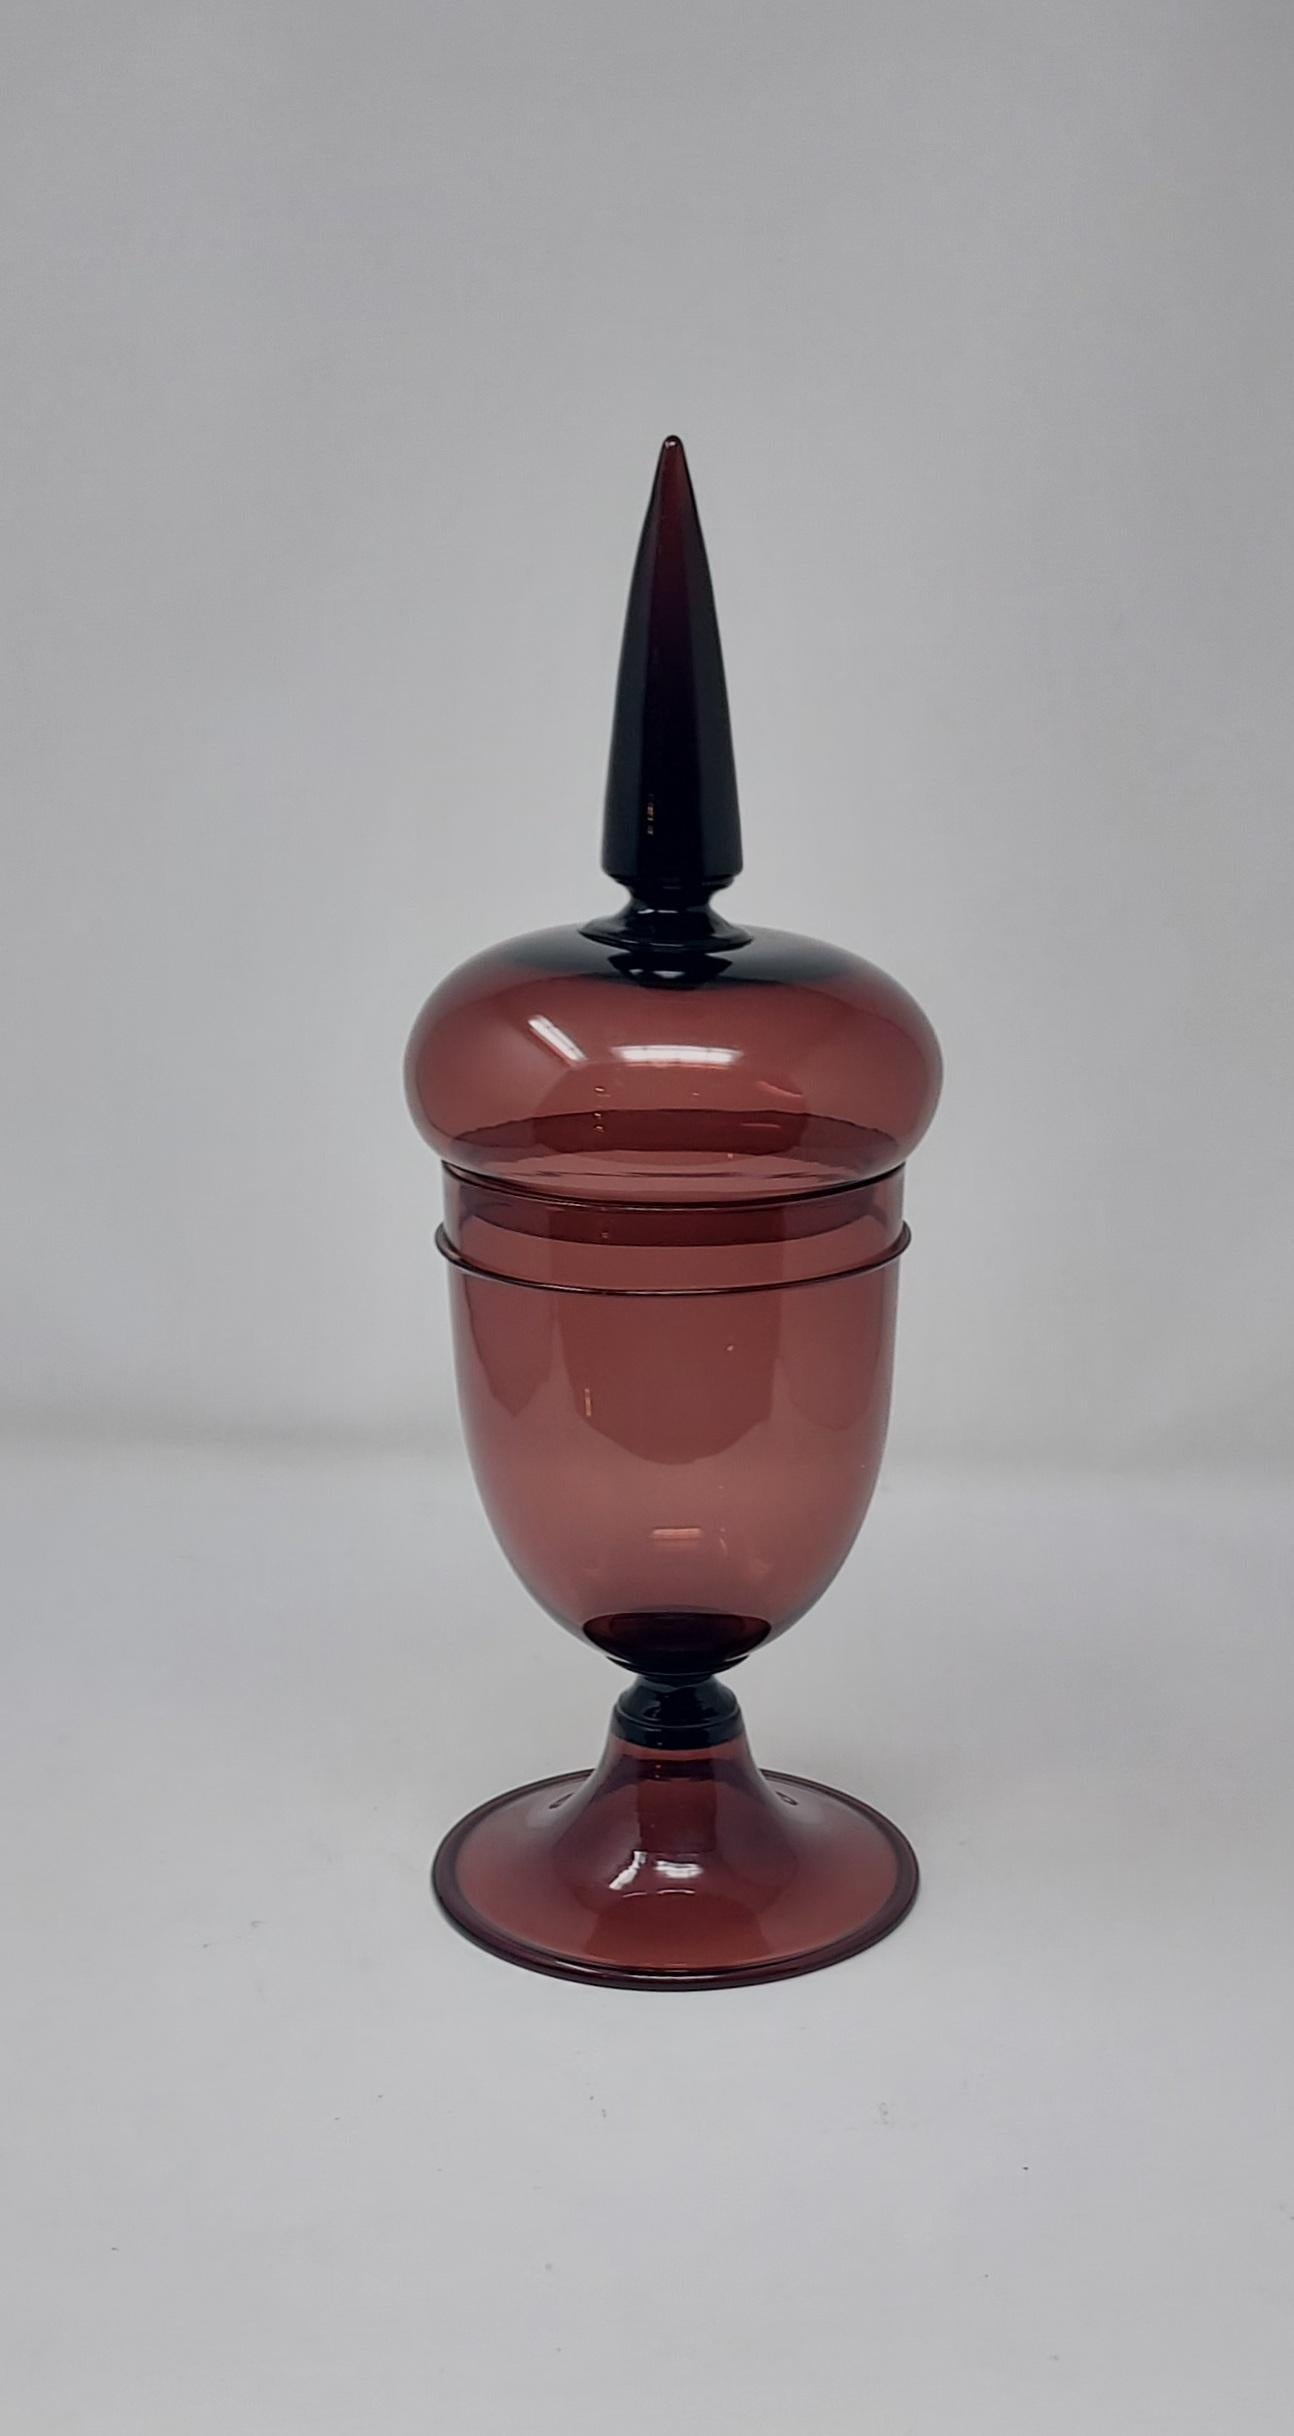 Paolo Venini's 18th century enspired  apothecary jars, Compotes. Model 4740 (red): 46 cm high with acid stamp signature and original papèr label. Model 4742 (grey): 46 cm high. Model 4744 (purple): 21 cm high with acid stamp signature. Venini 1959.